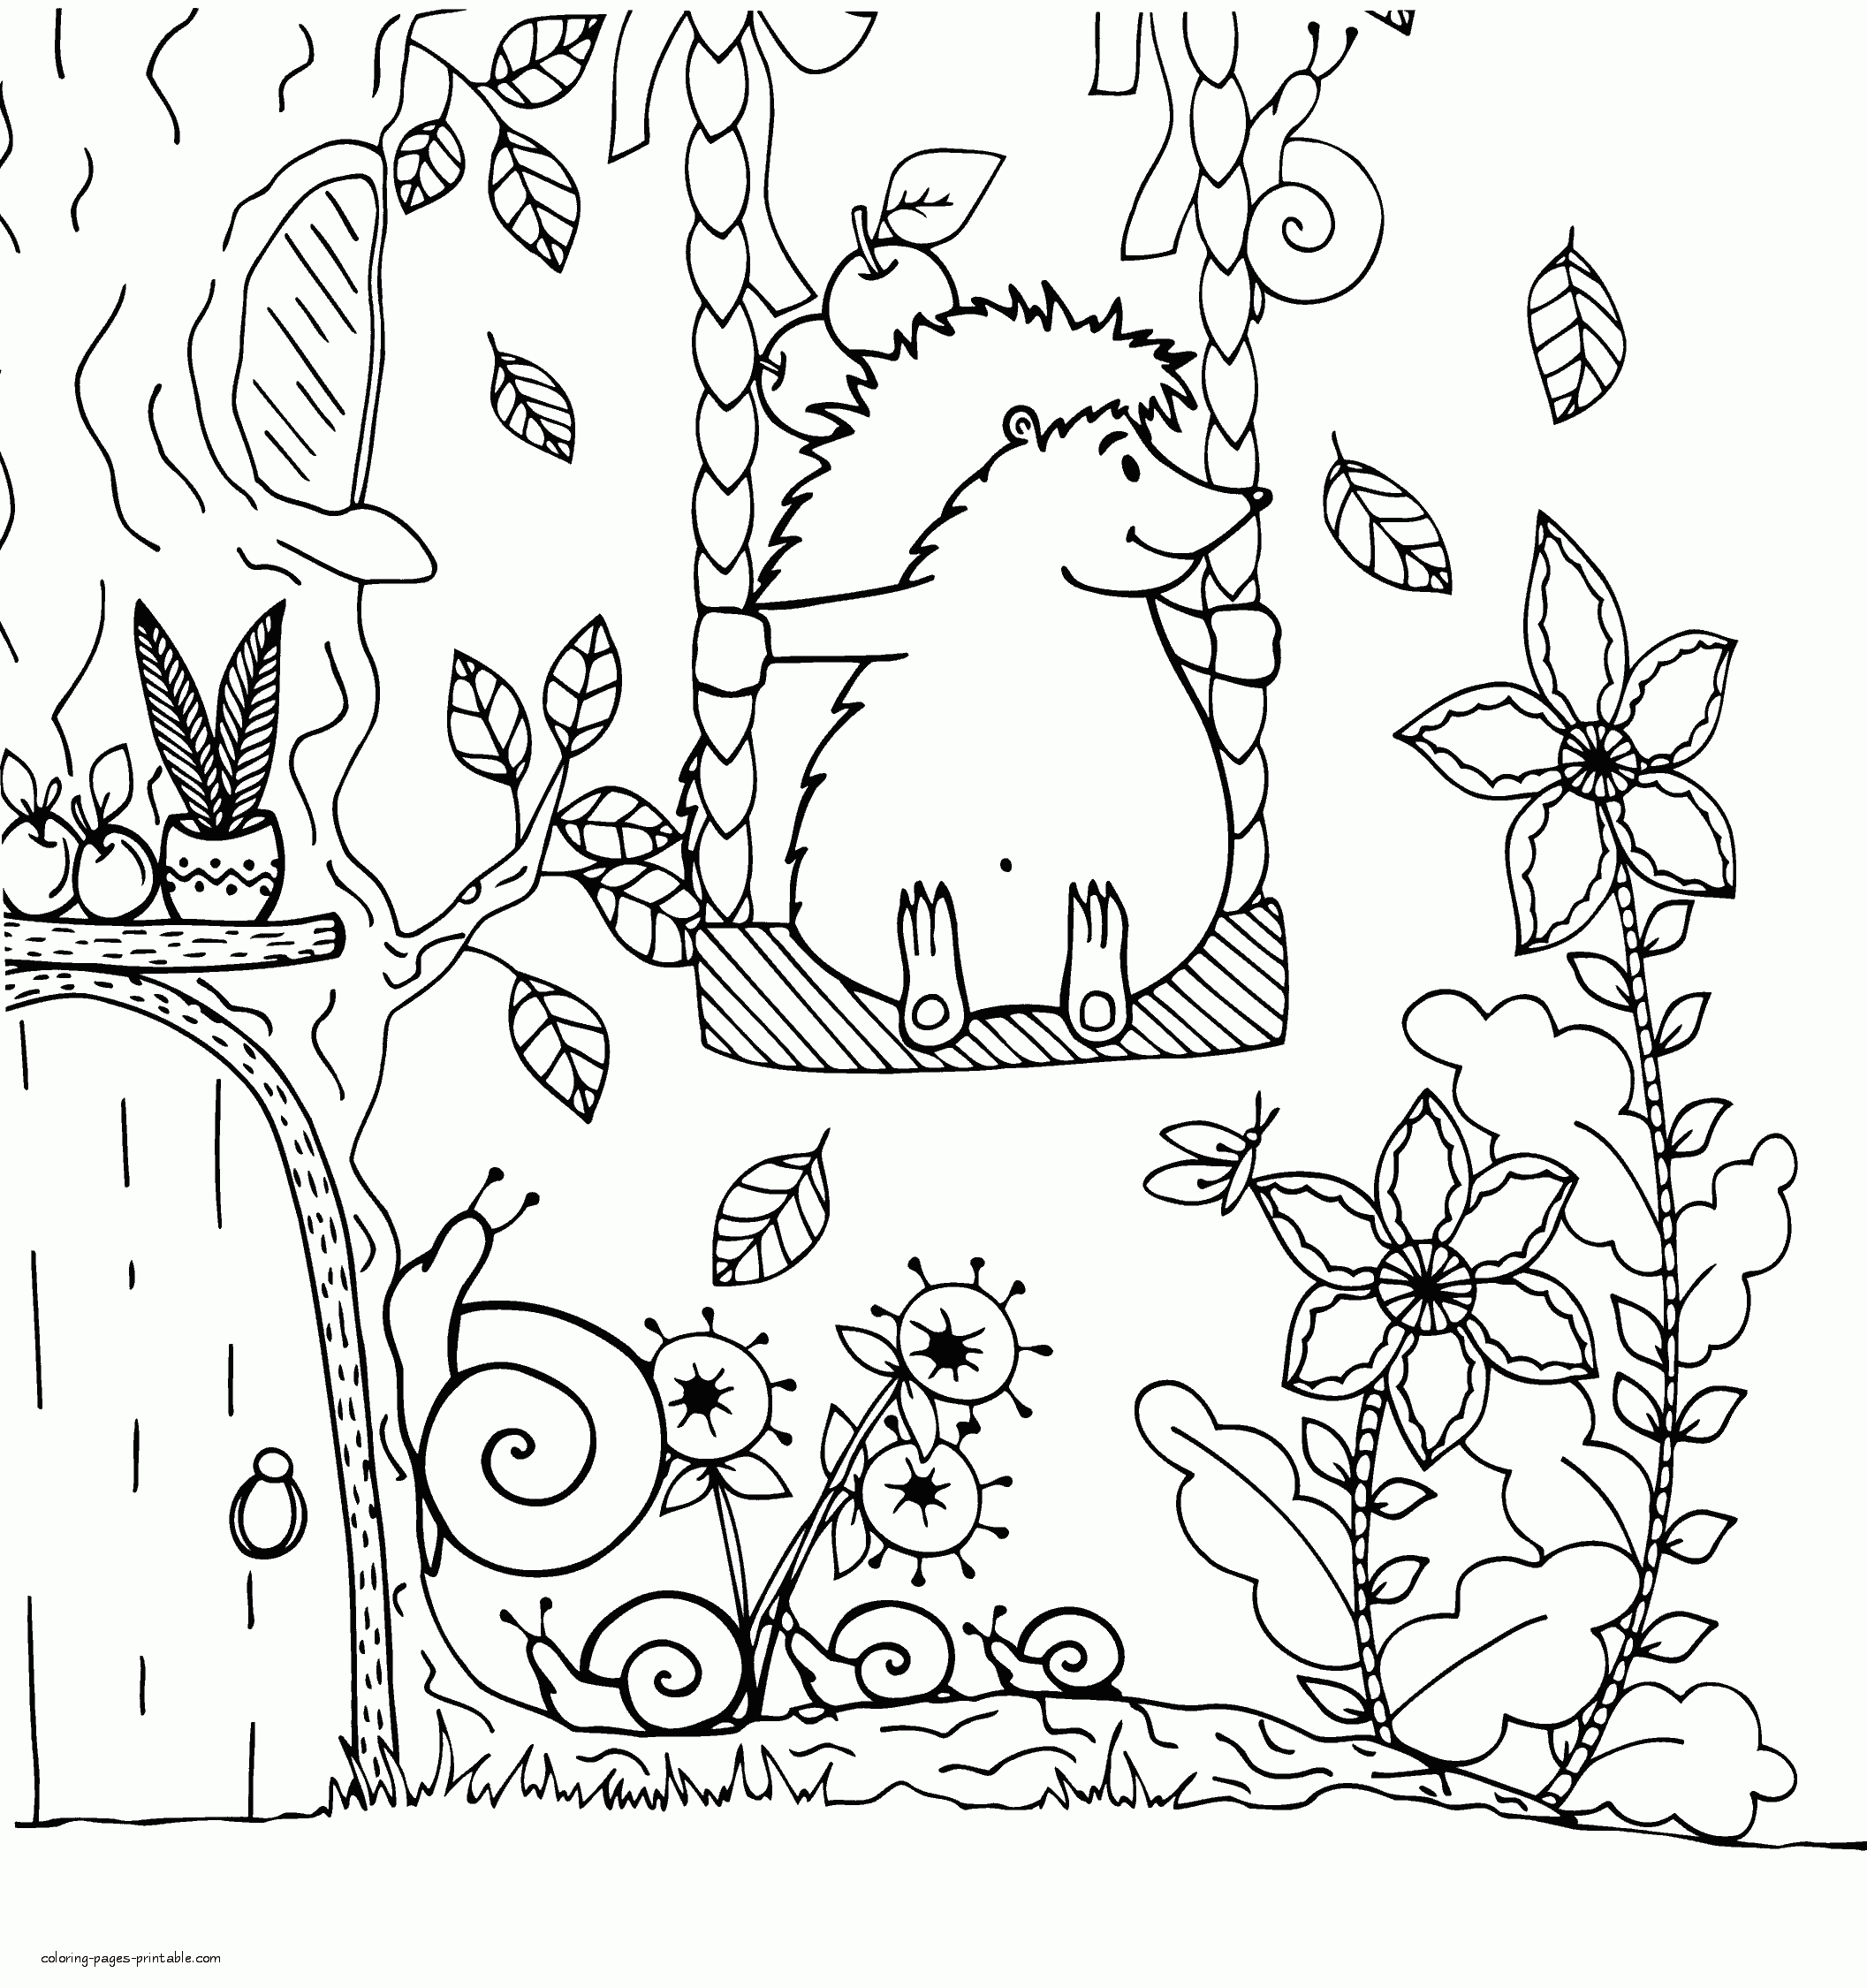 Download Hedgehog Coloring Page | Coloringnori - Coloring Pages for ...